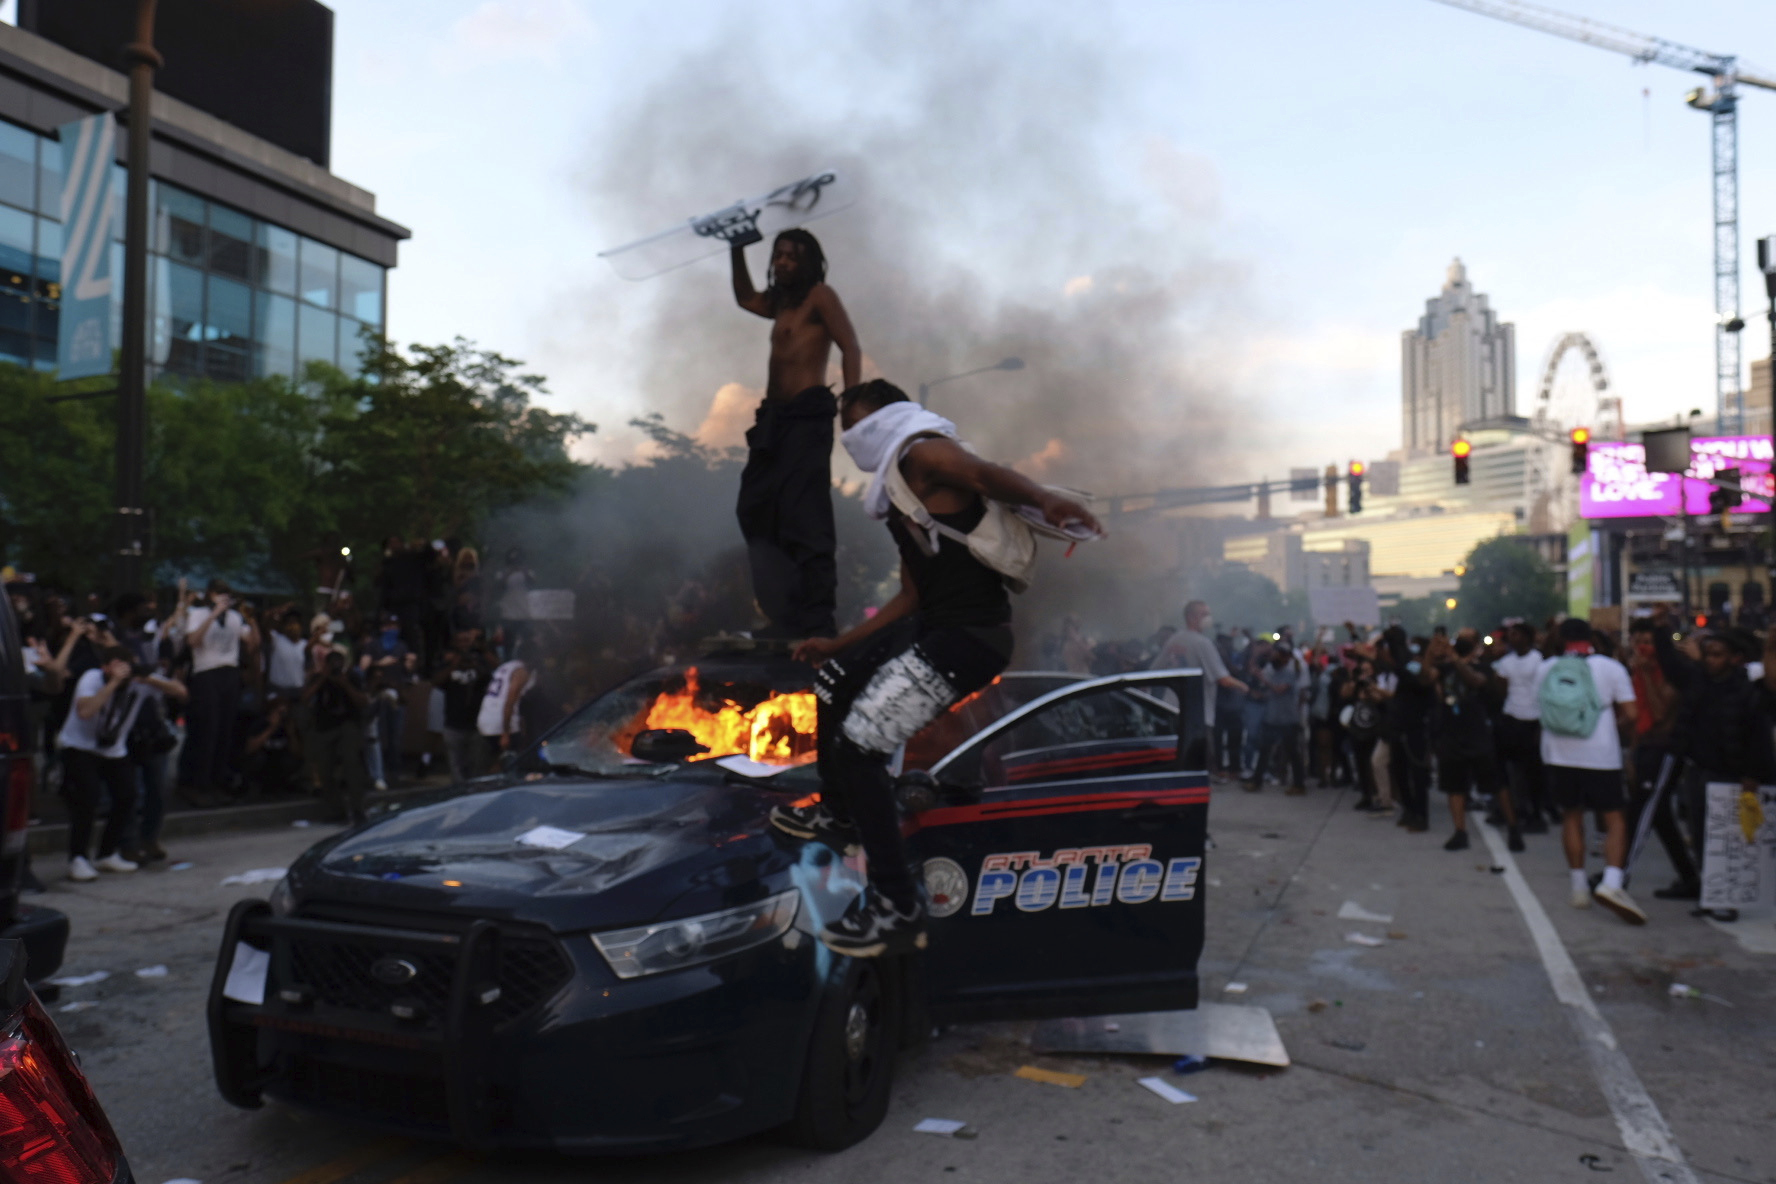 PHOTO: Protesters smash police cars in Atlanta, Friday, May 29, 2020. Protesters marched for George Floyd, who died after being restrained by Minneapolis police officers on Memorial Day.